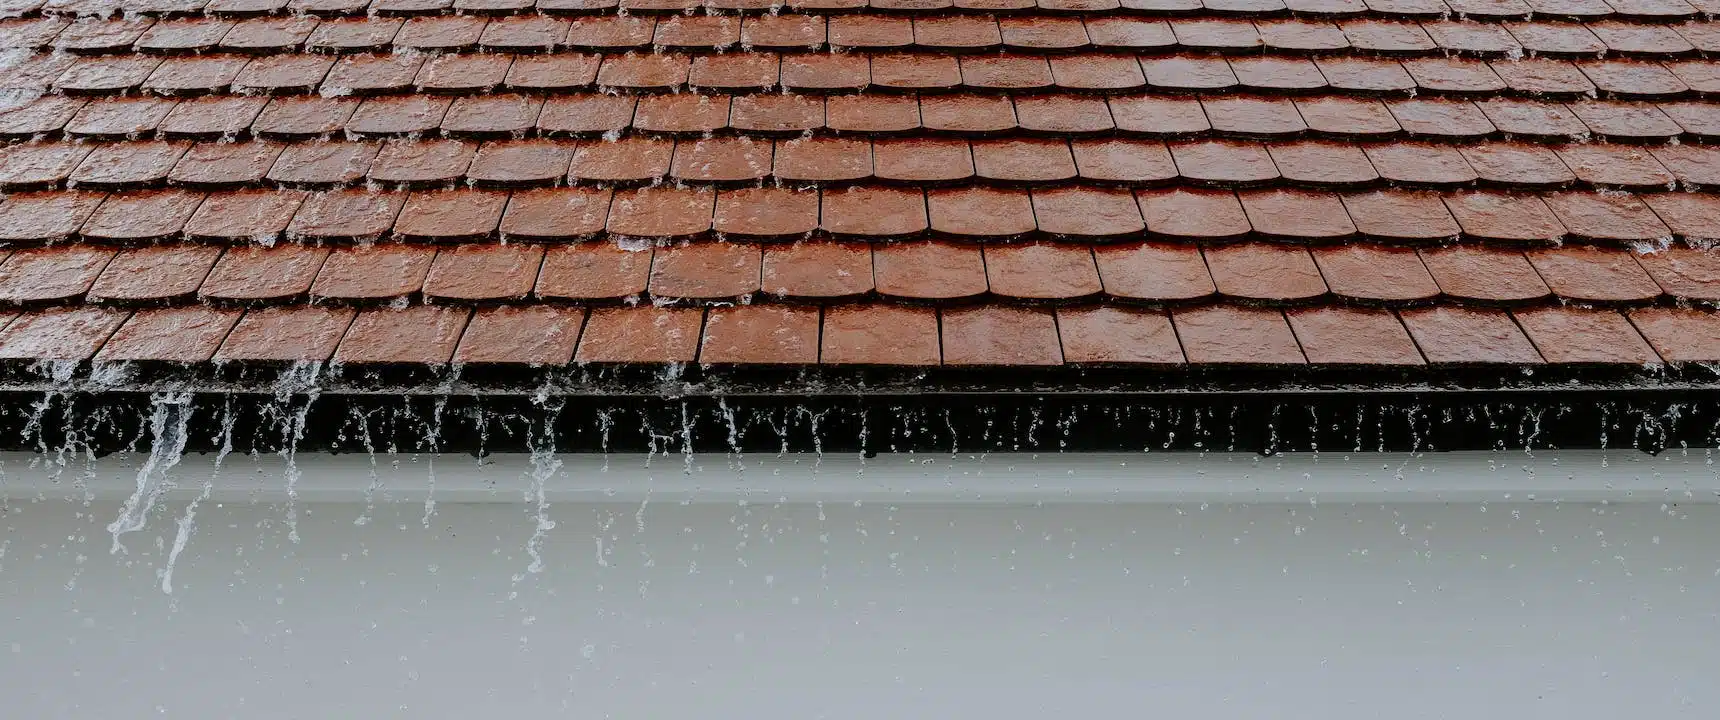 roof shingles during rainy season : Everything You Need to Know and Do When Your Roof Is Leaking